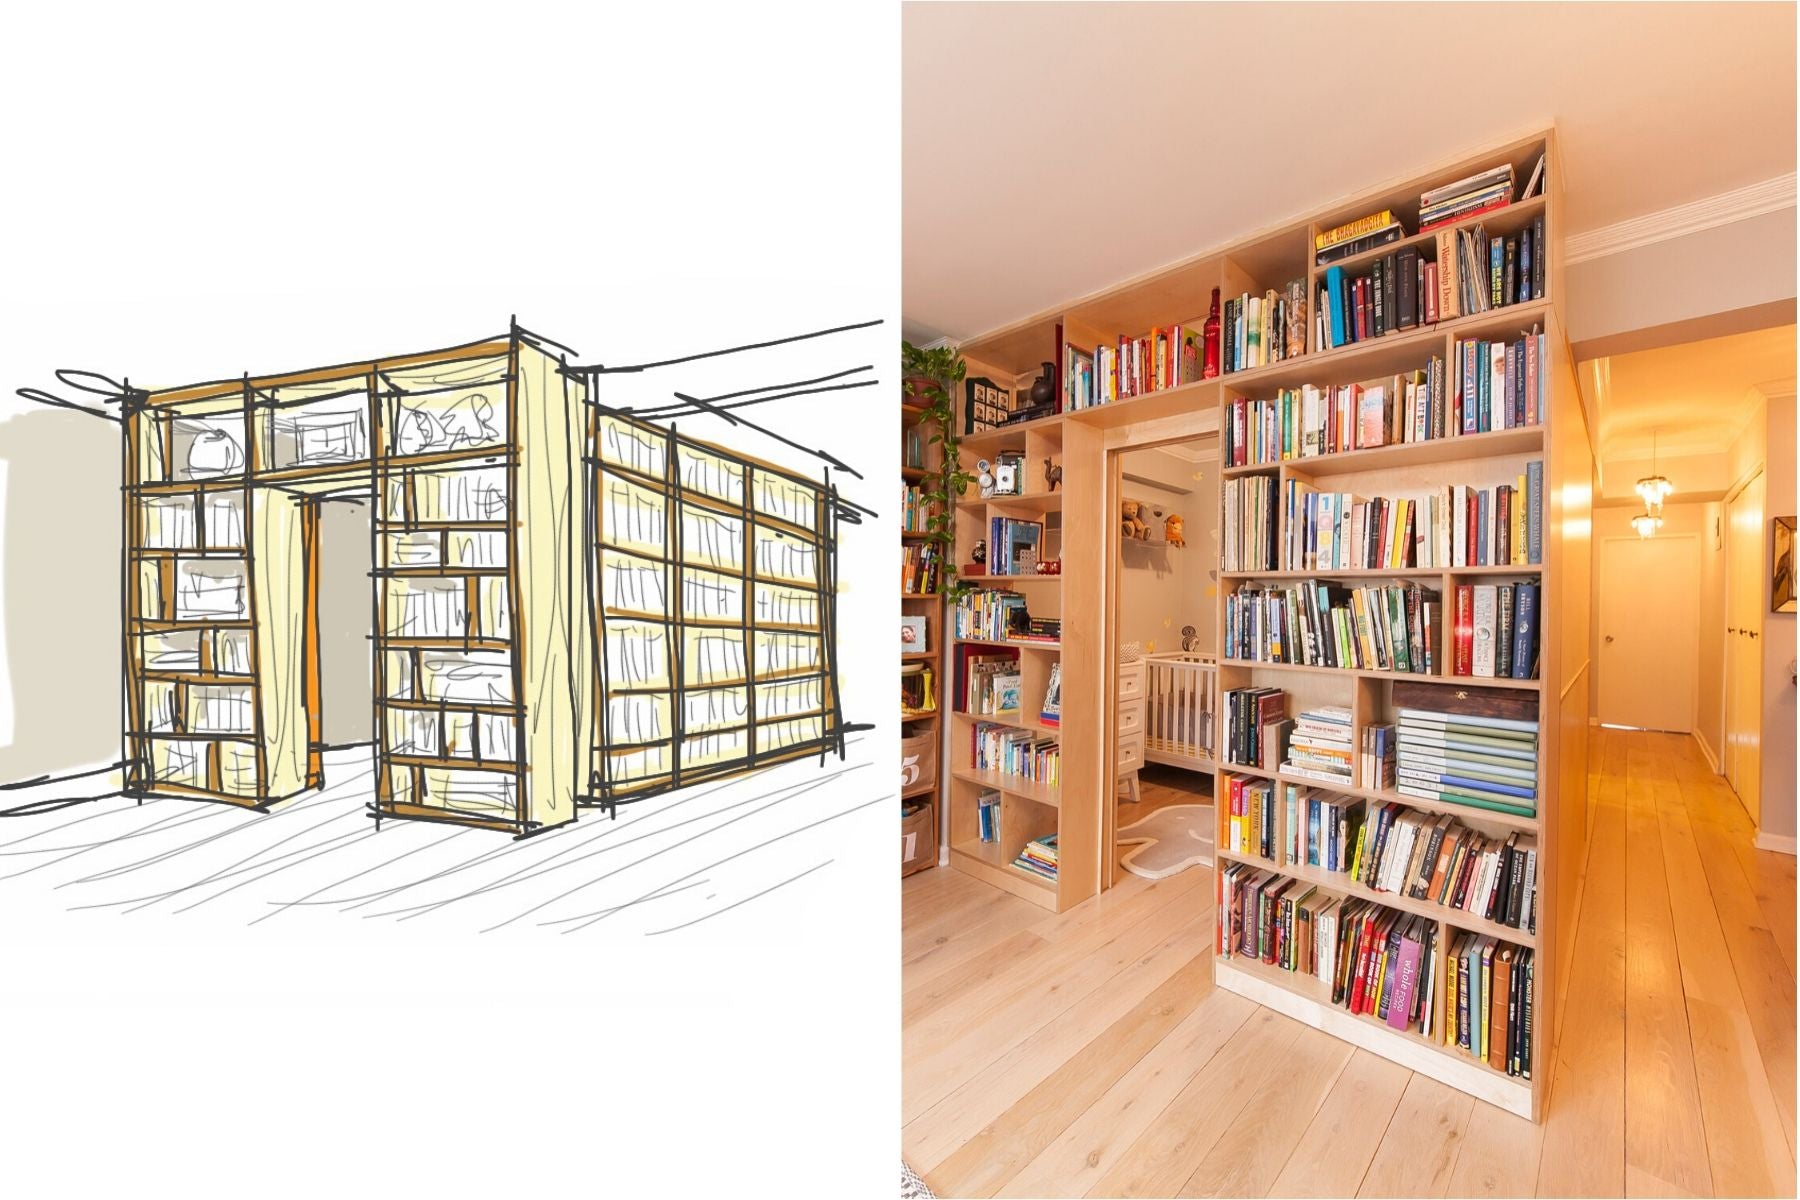 Sketch and photo of a bookcase with books in a cozy room.